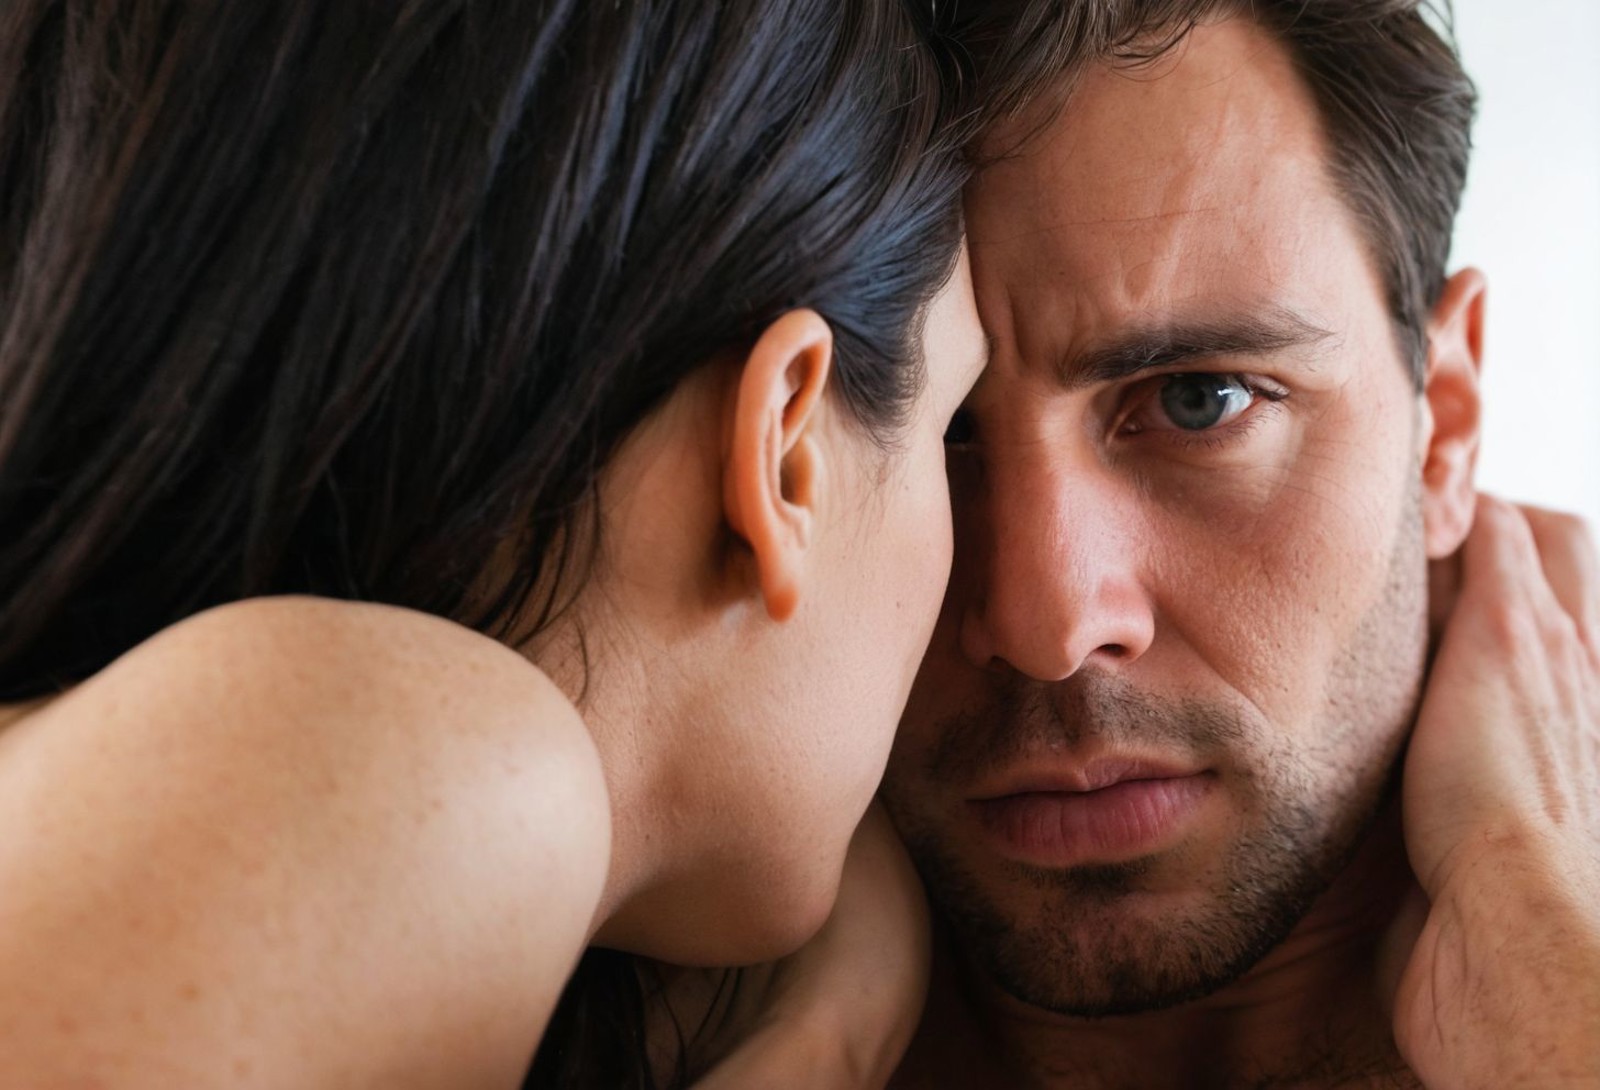 A woman with dark hair is shown in a close-up shot, her face partially obscured by the man's body. Her eyes are focused on...